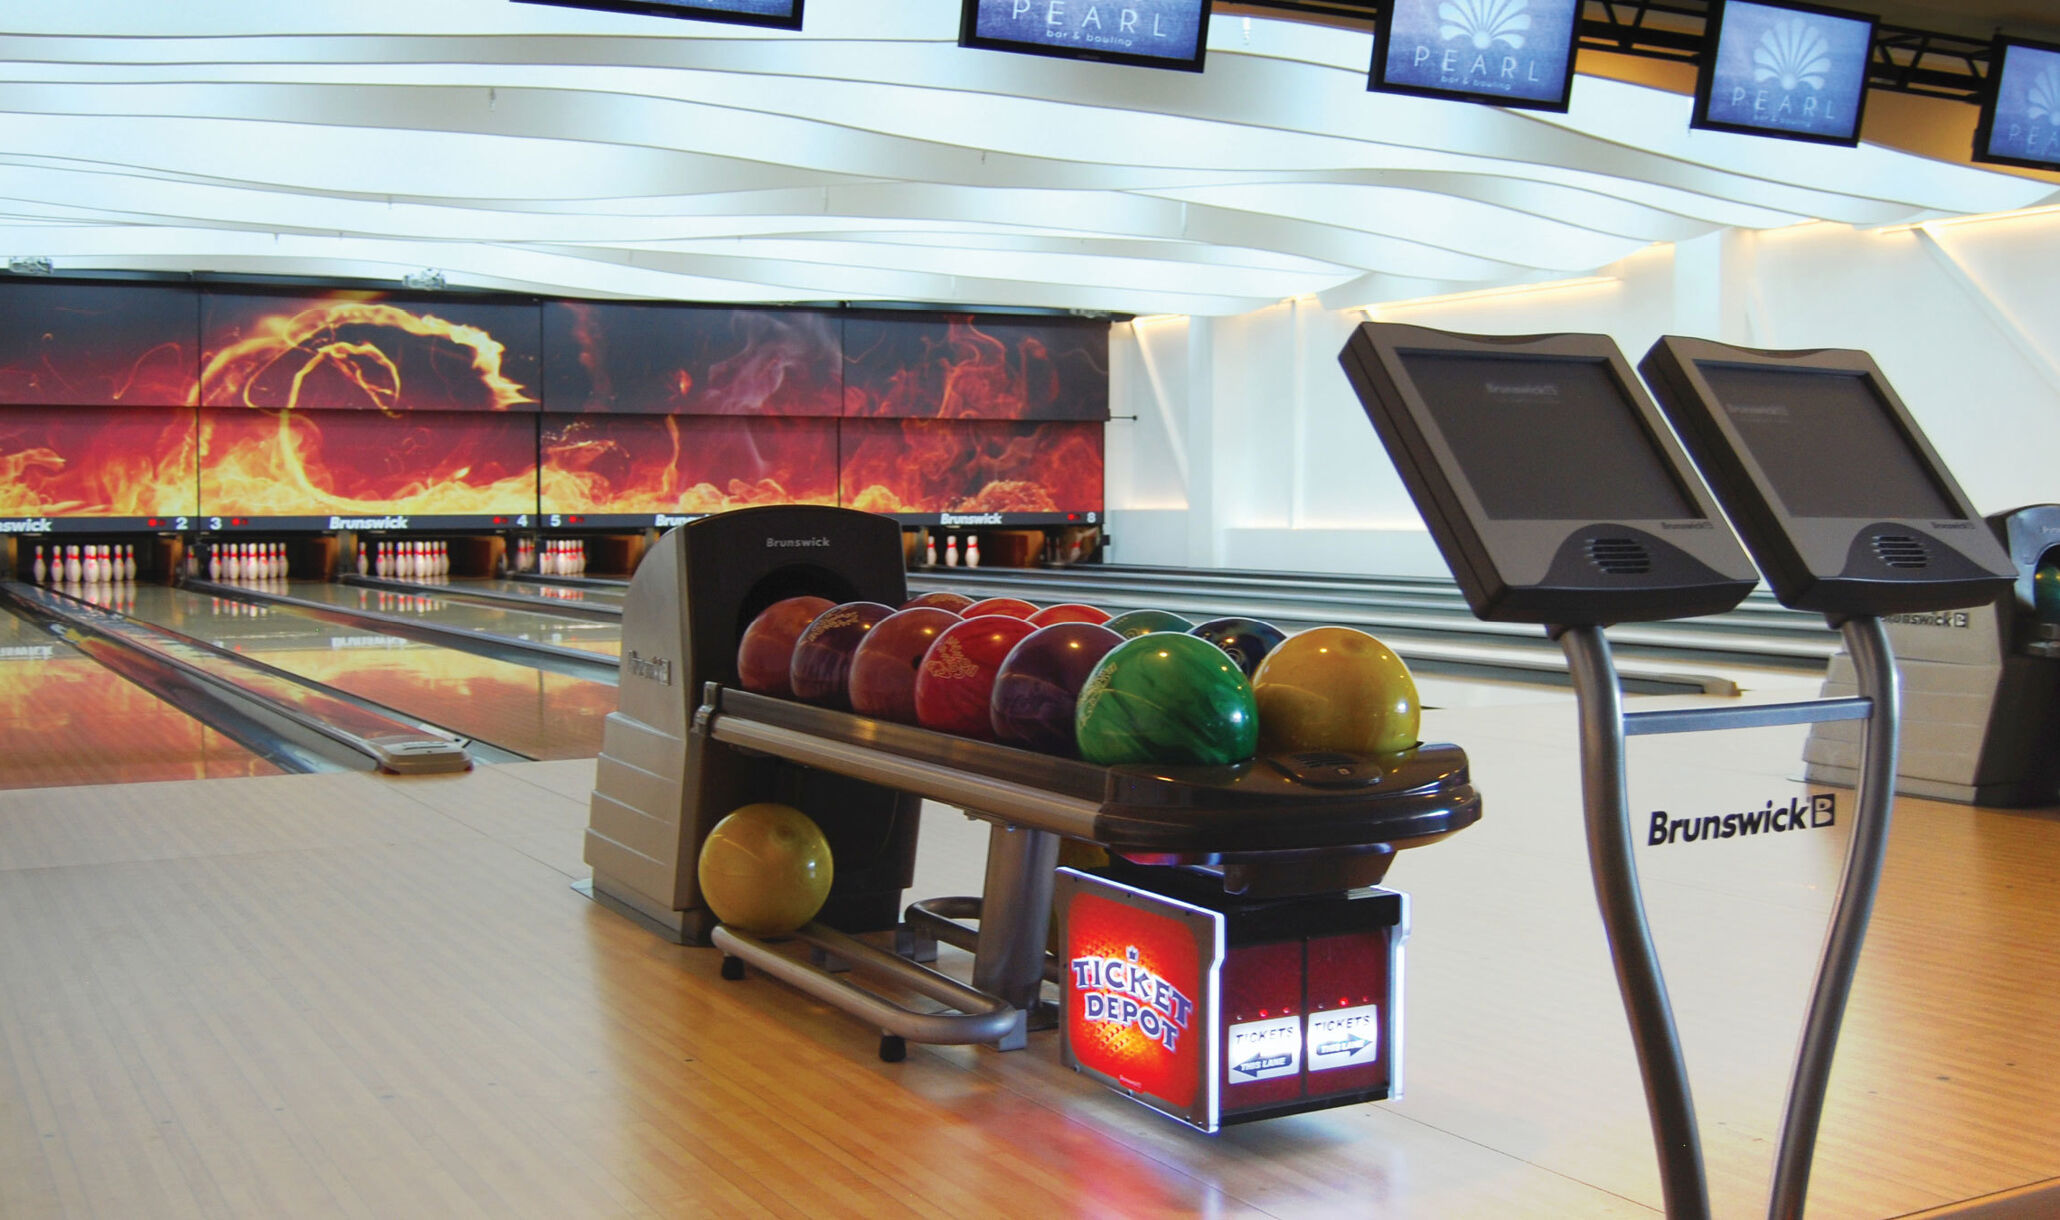 Pearl Bowling Center Budapest Hungary 16X9 08-3